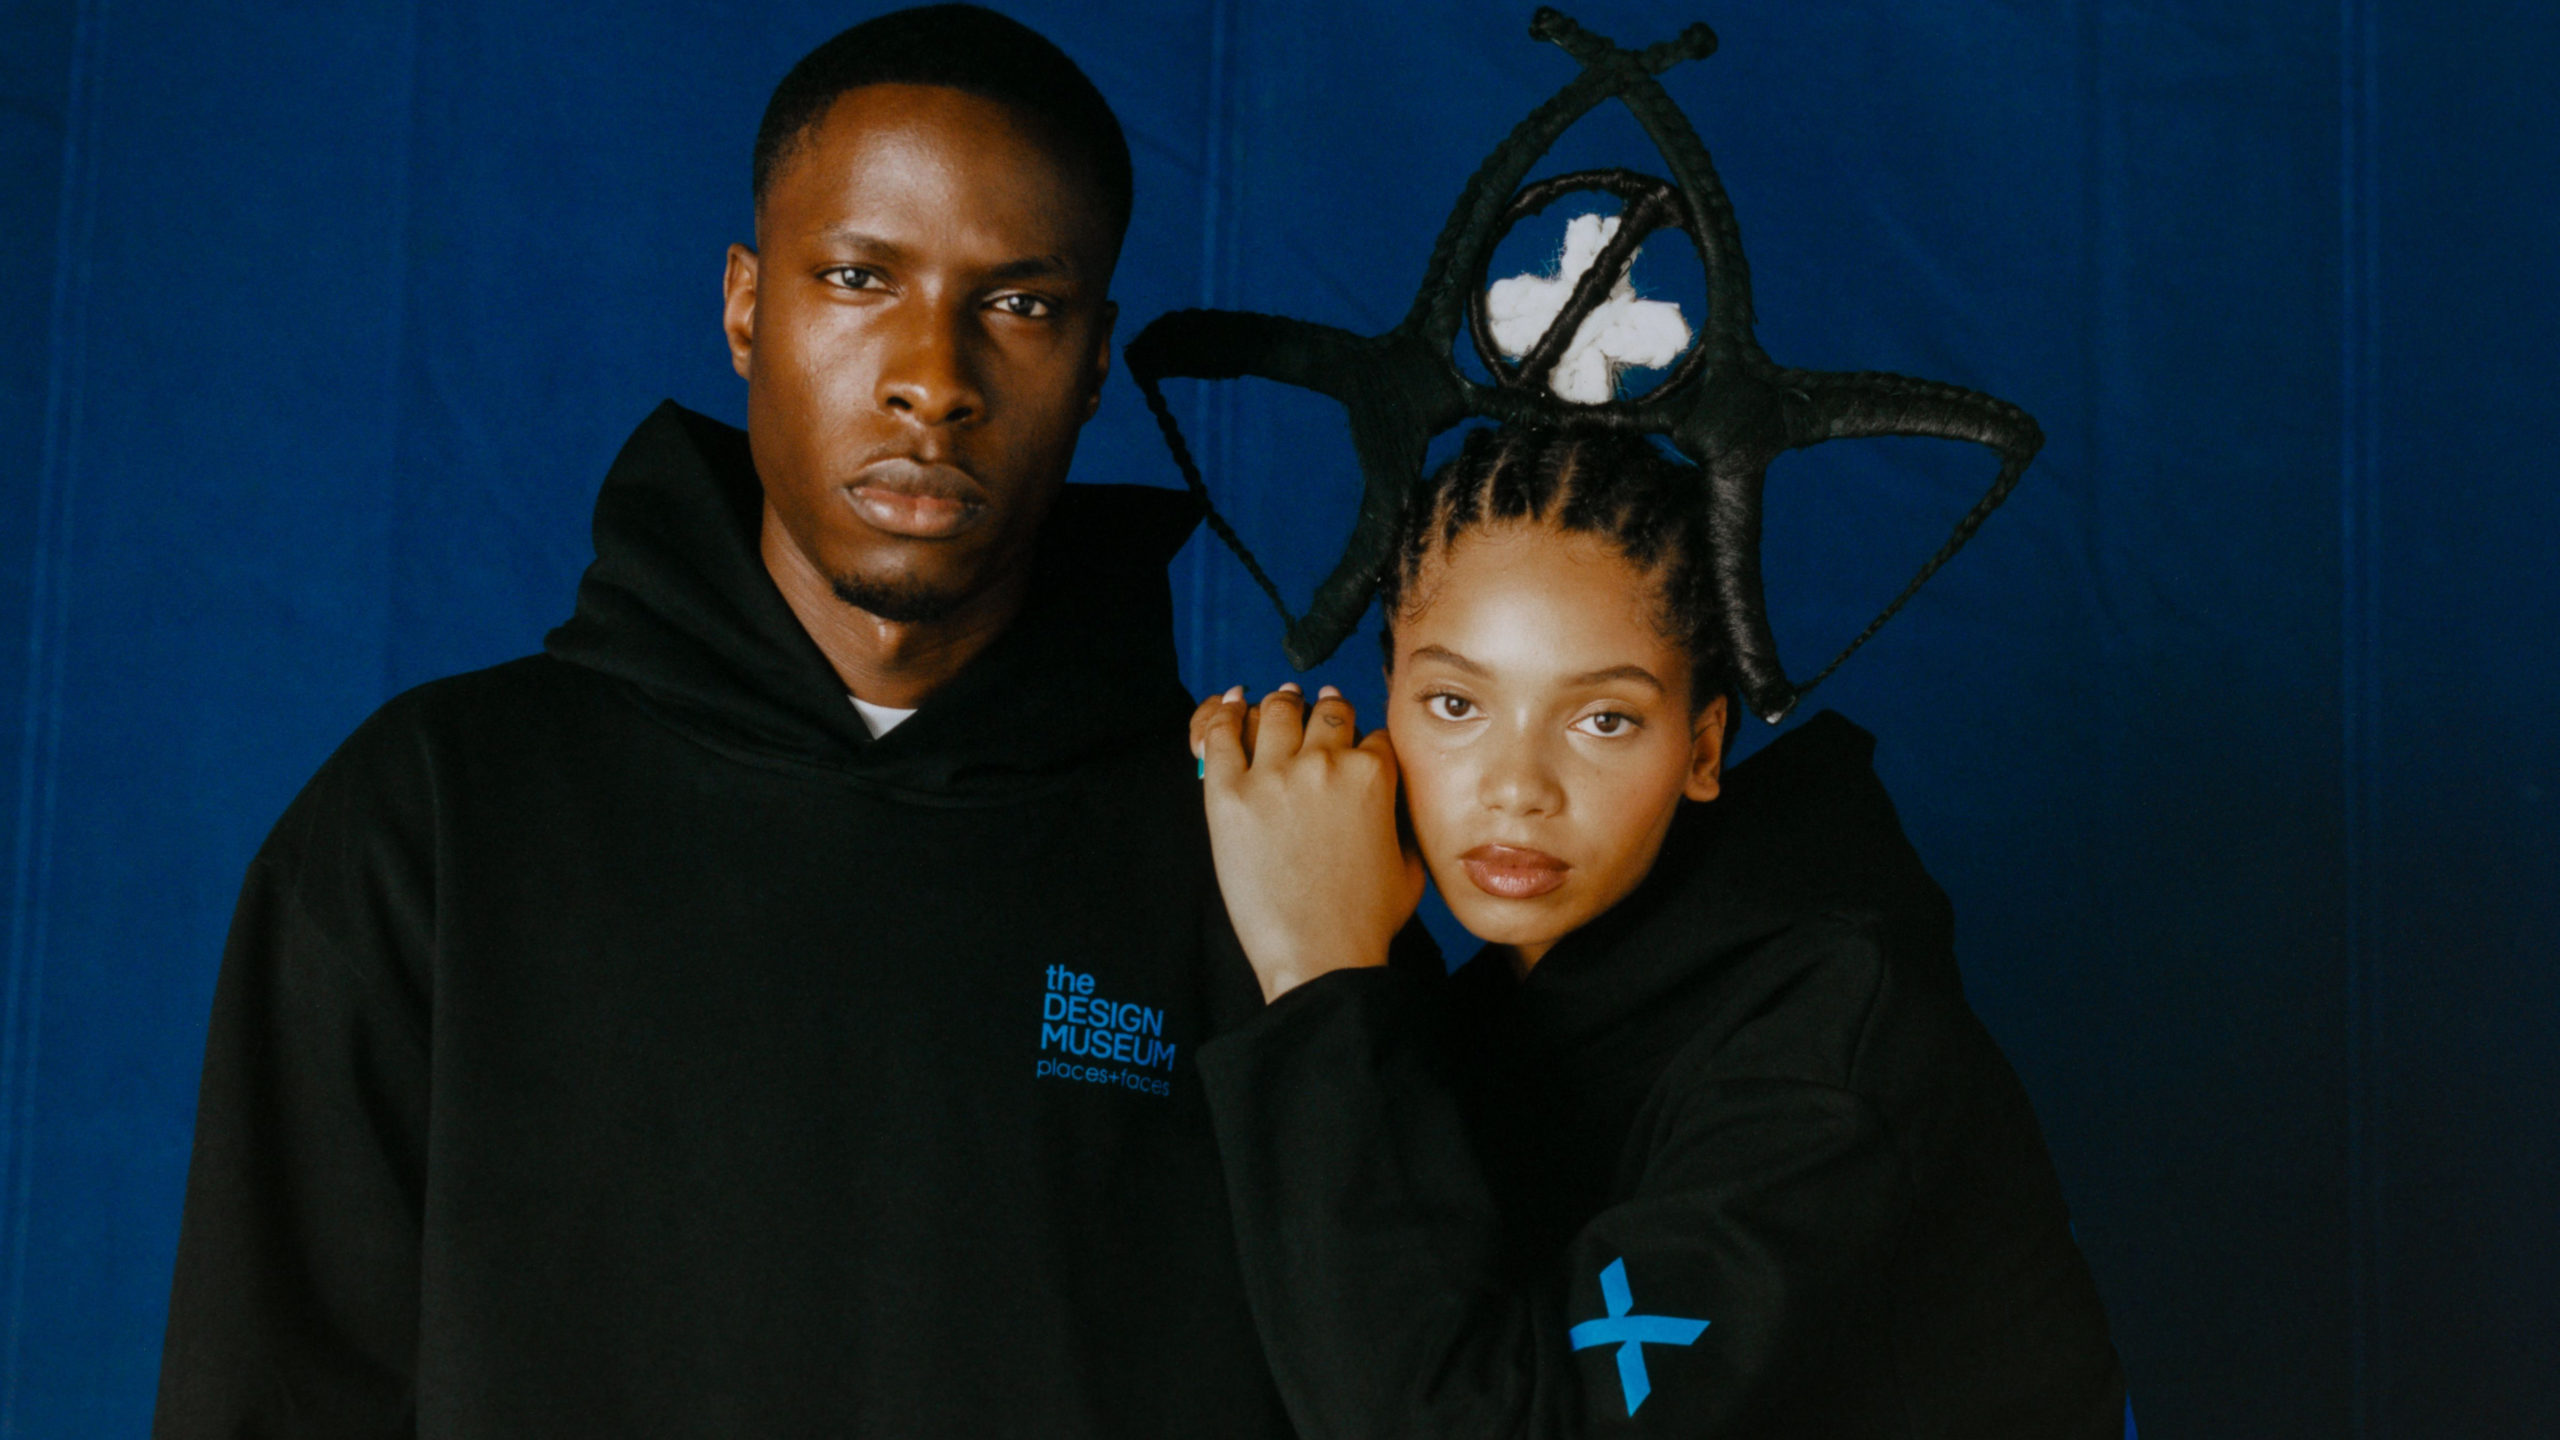 Places+Faces, StockX and the Design Museum launch collaborative merch collection